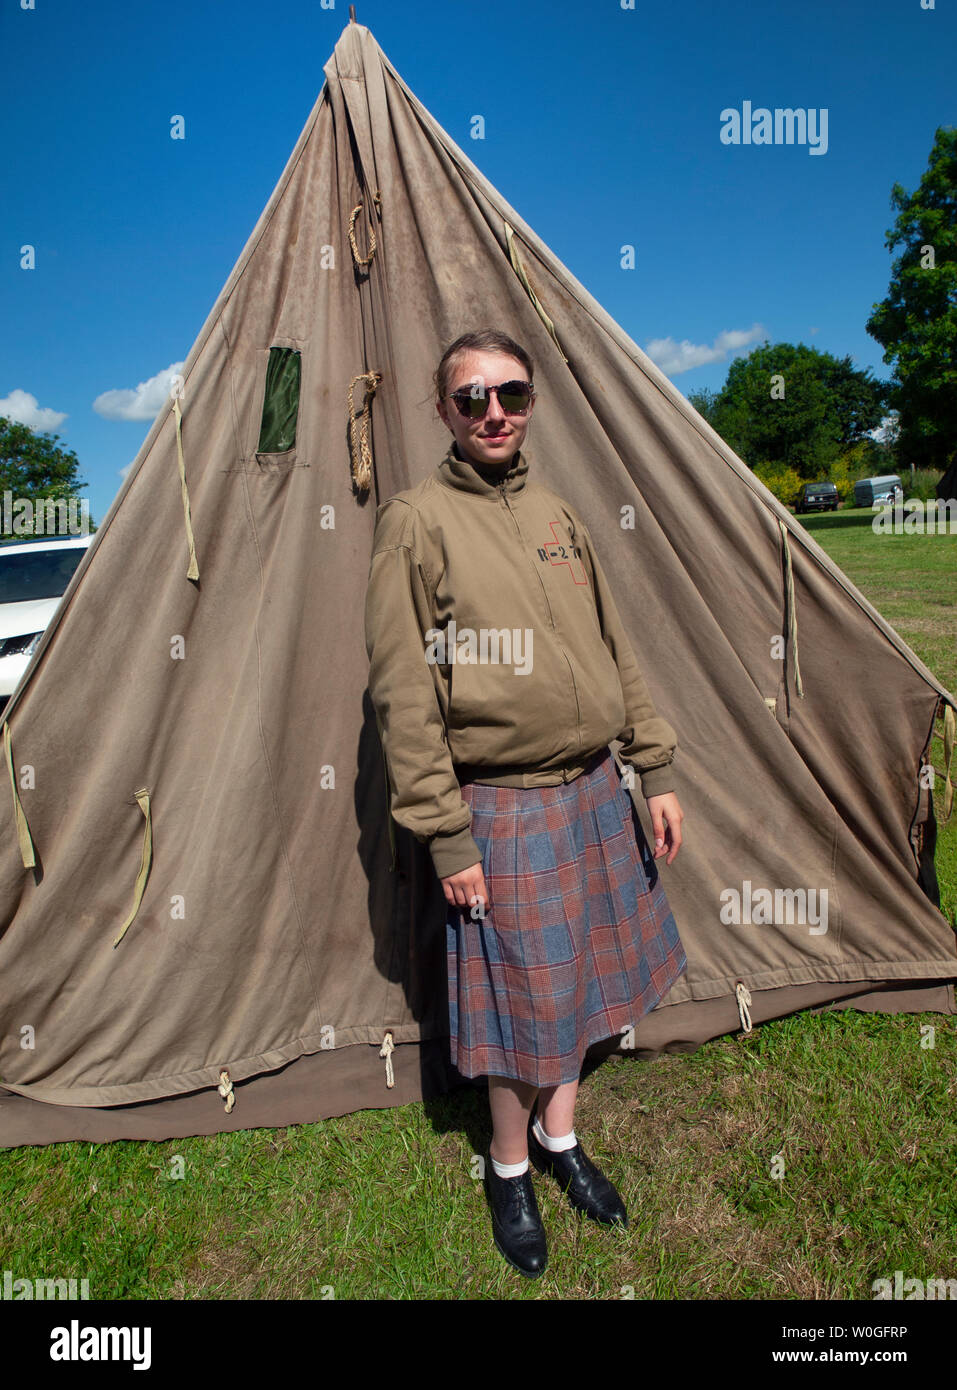 Page 2 - 2 Tents High Resolution Stock Photography and Images - Alamy